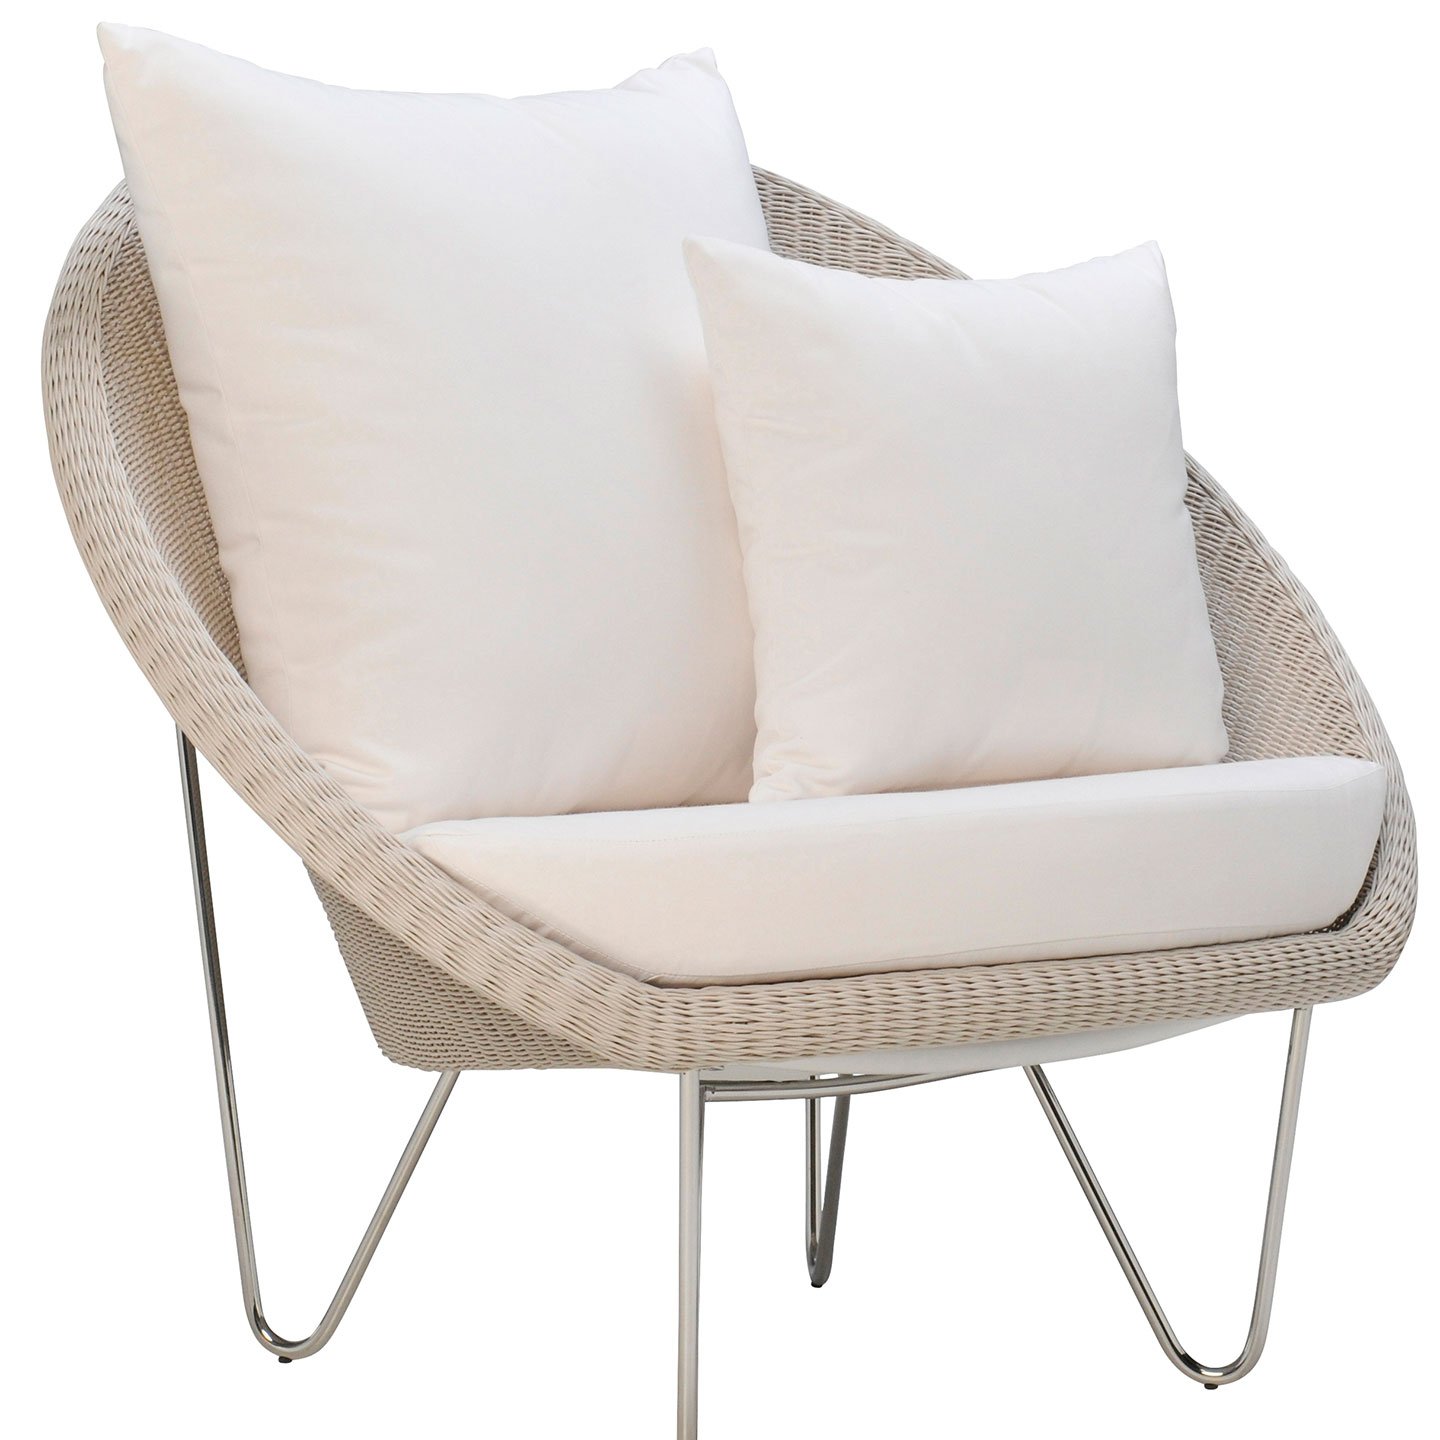 Haworth Gigi II lounge chair in off white color with white seating and cushions